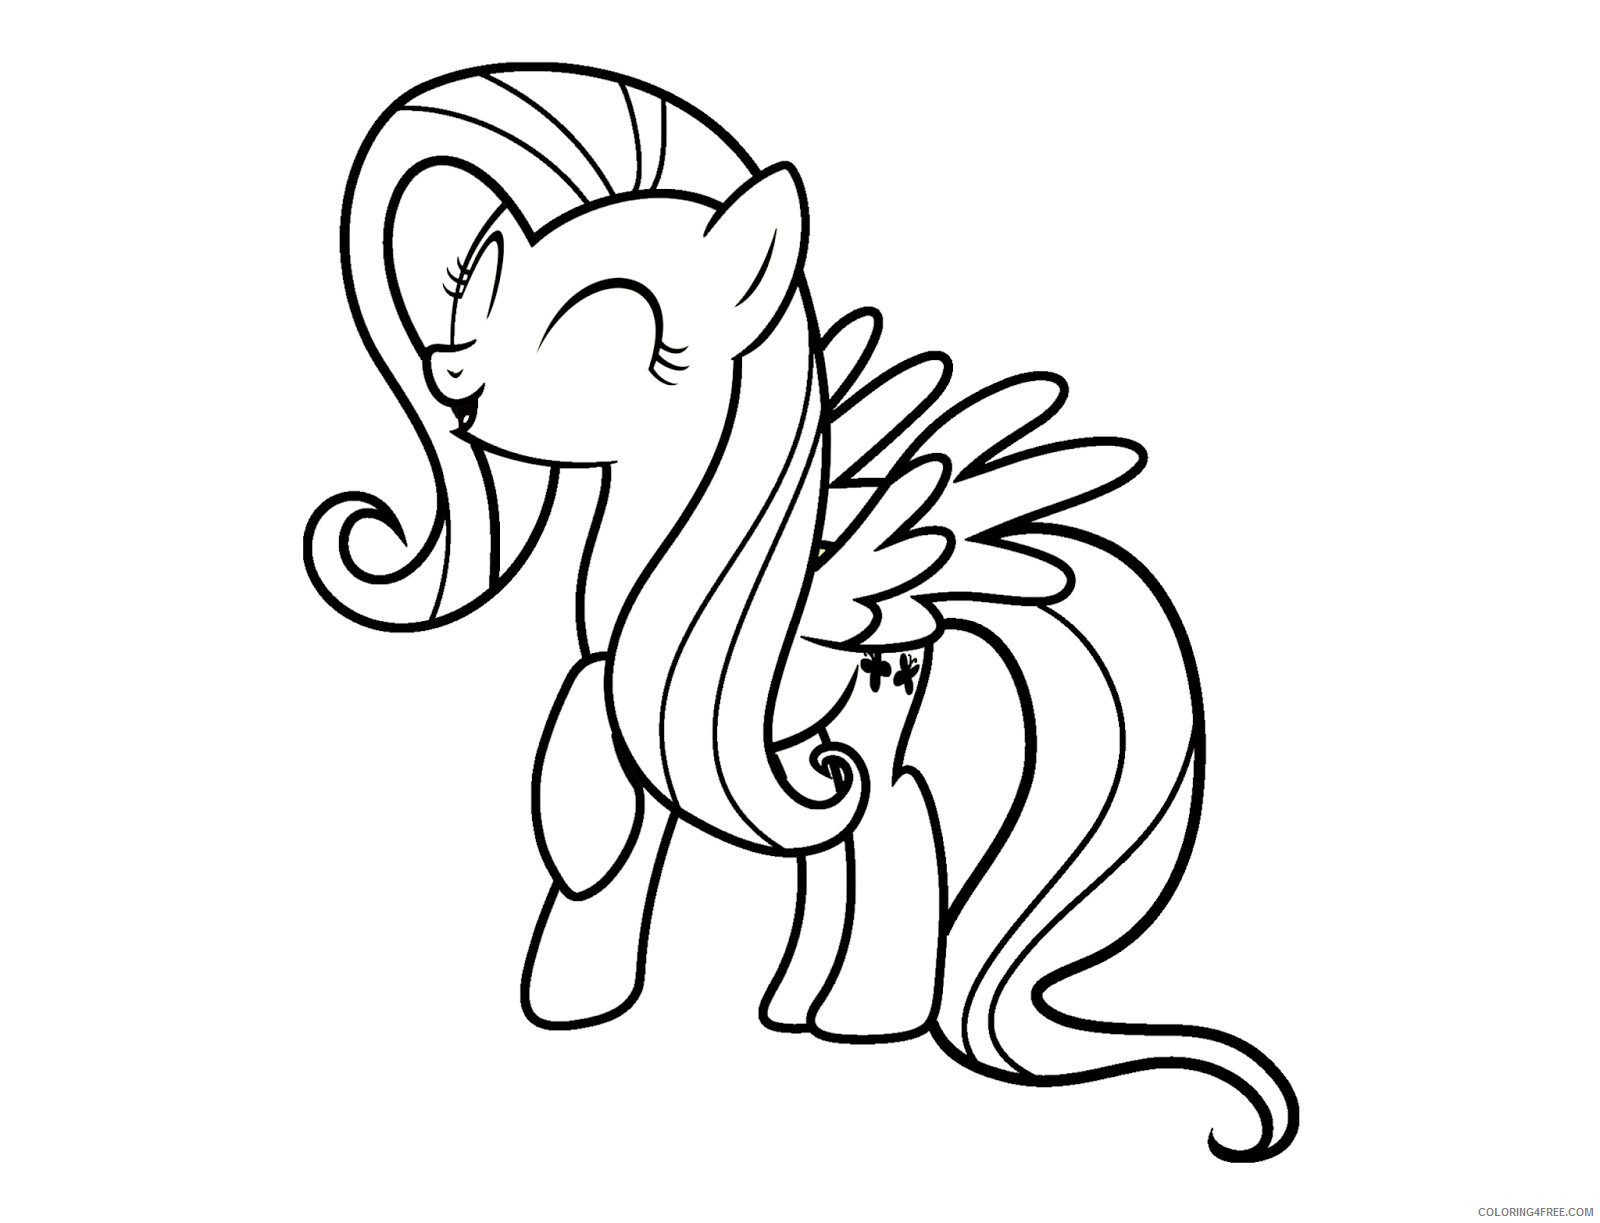 Fluttershy Coloring Pages Fluttershy Frees Printable 2021 2690 Coloring4free